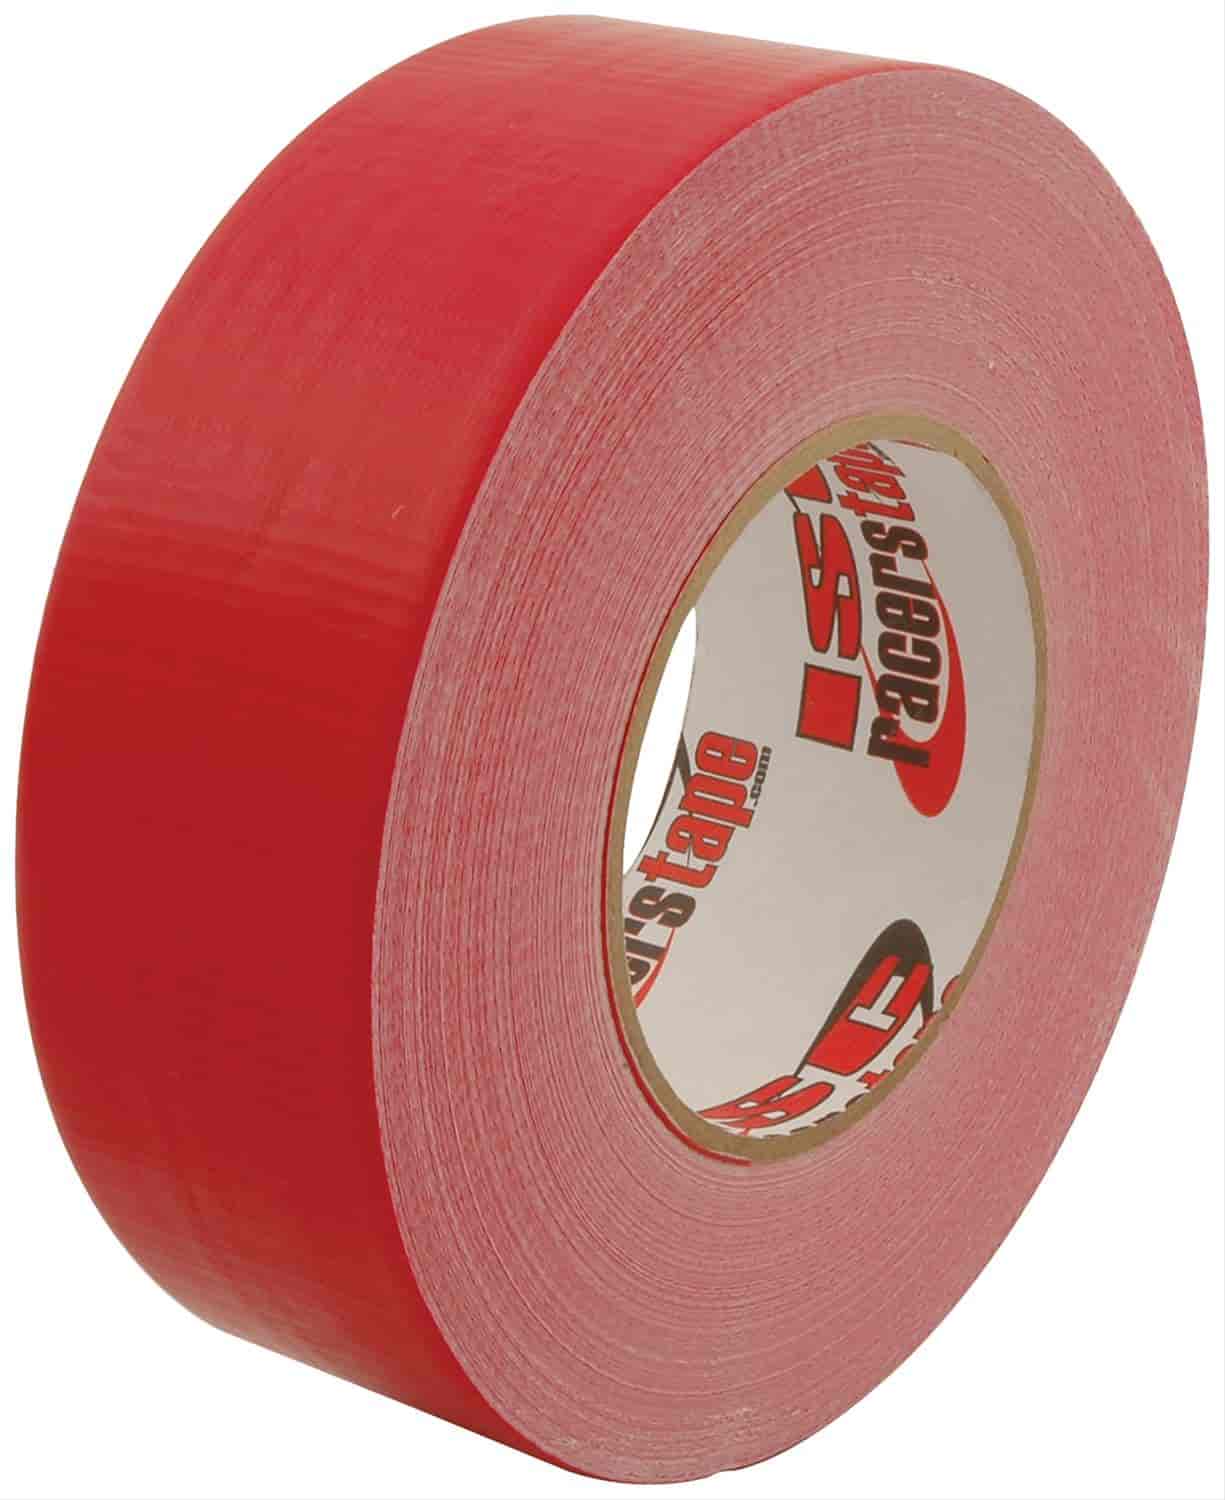 2" x 180" Racer"s Tape Red